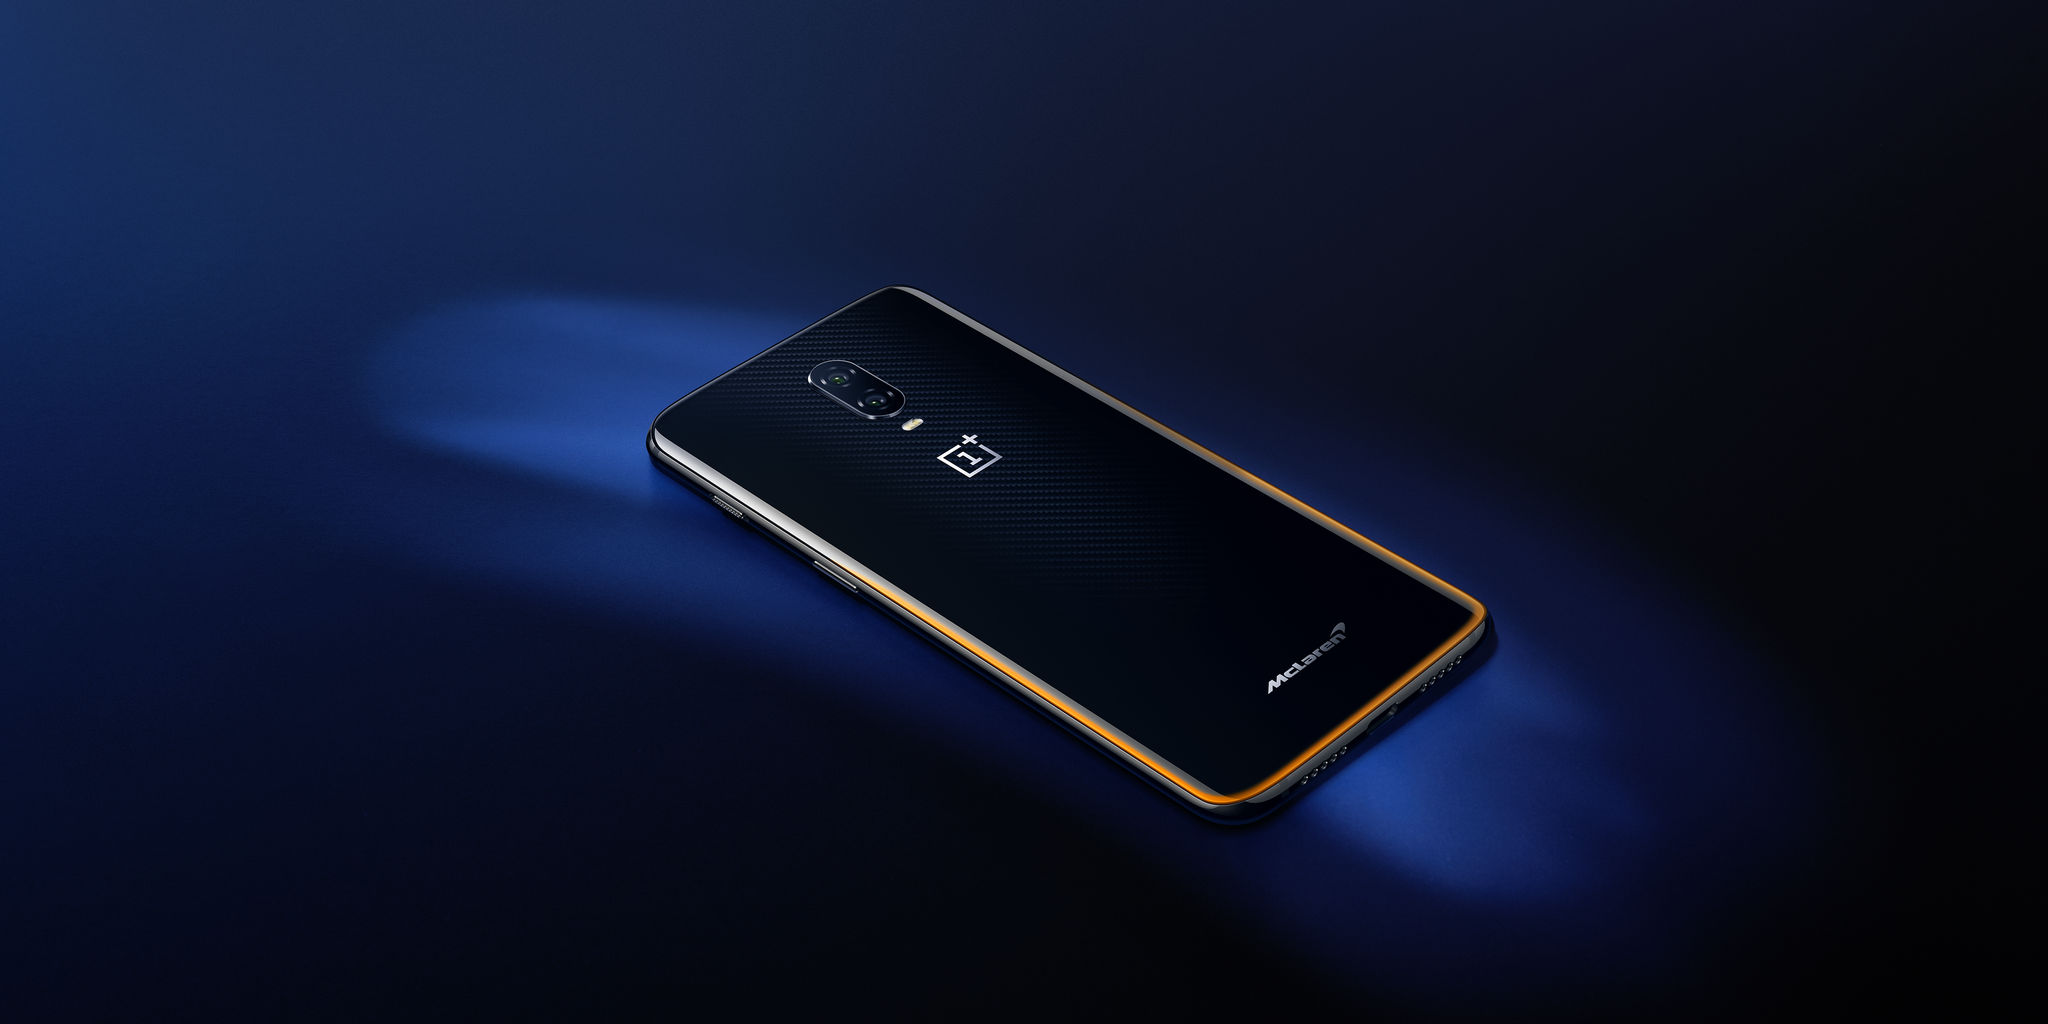 Here’s why the OnePlus 6T ‘McLaren Edition’ is a perfect year-end gift